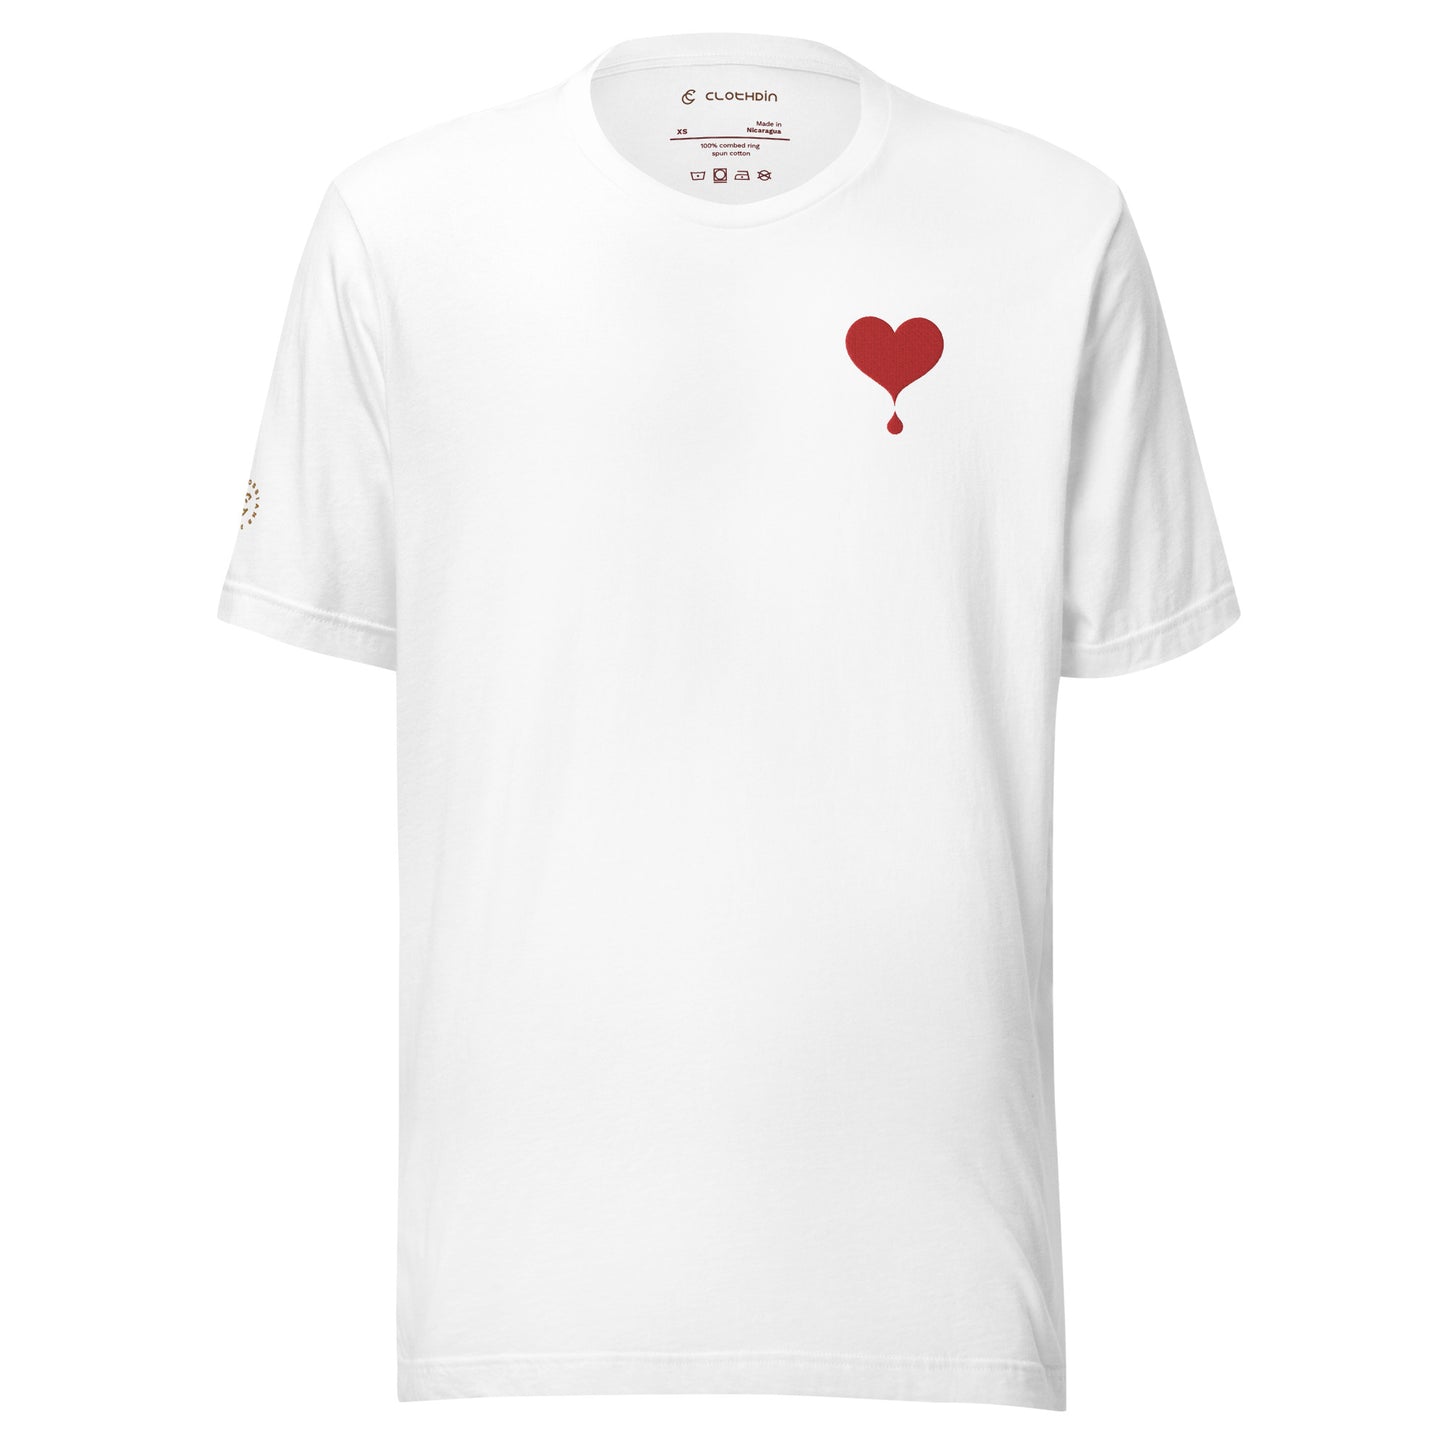 Blood Shed in Love t-shirt